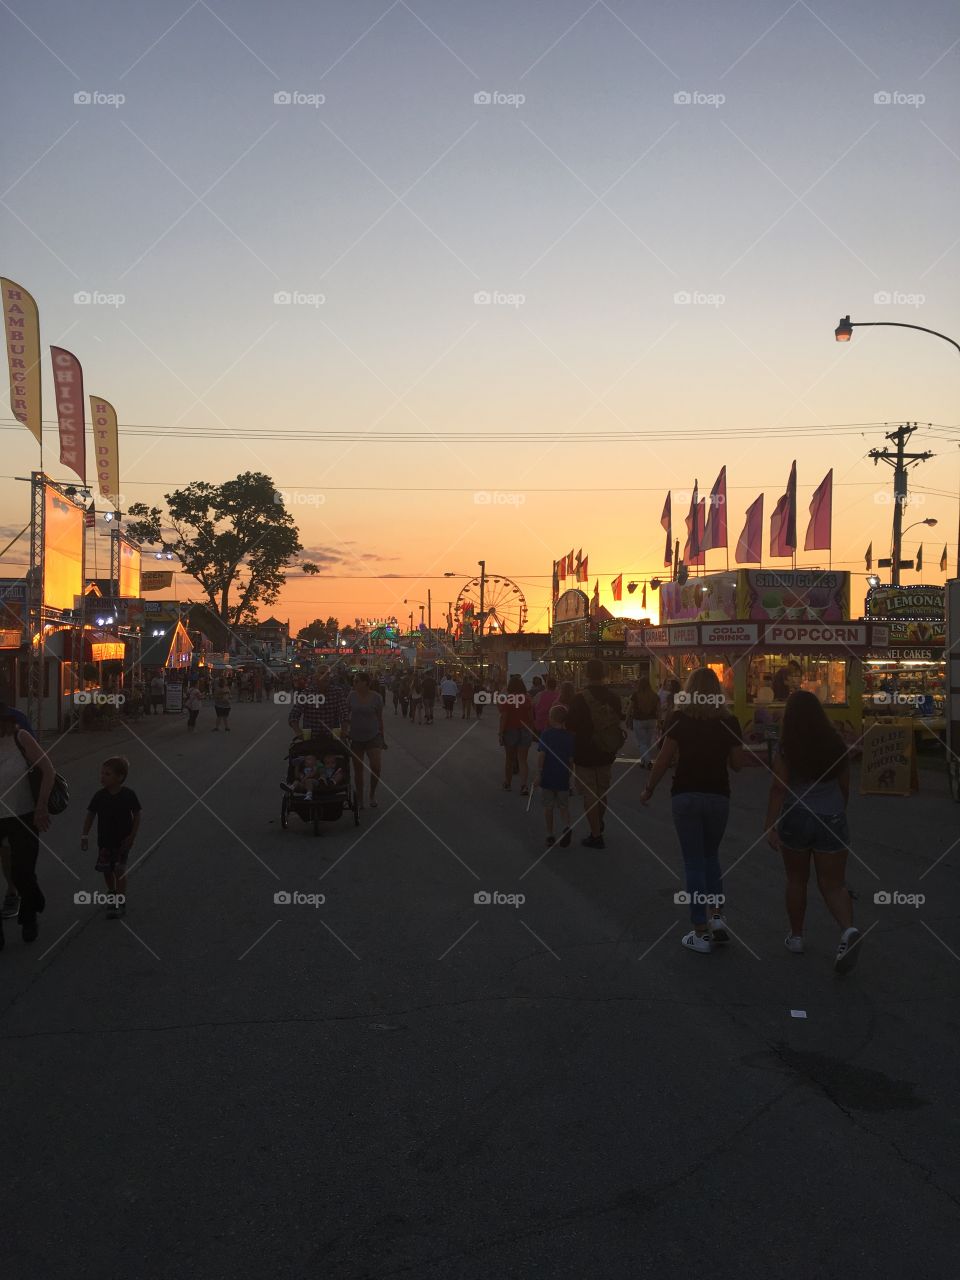 Sunset at the MO state fair